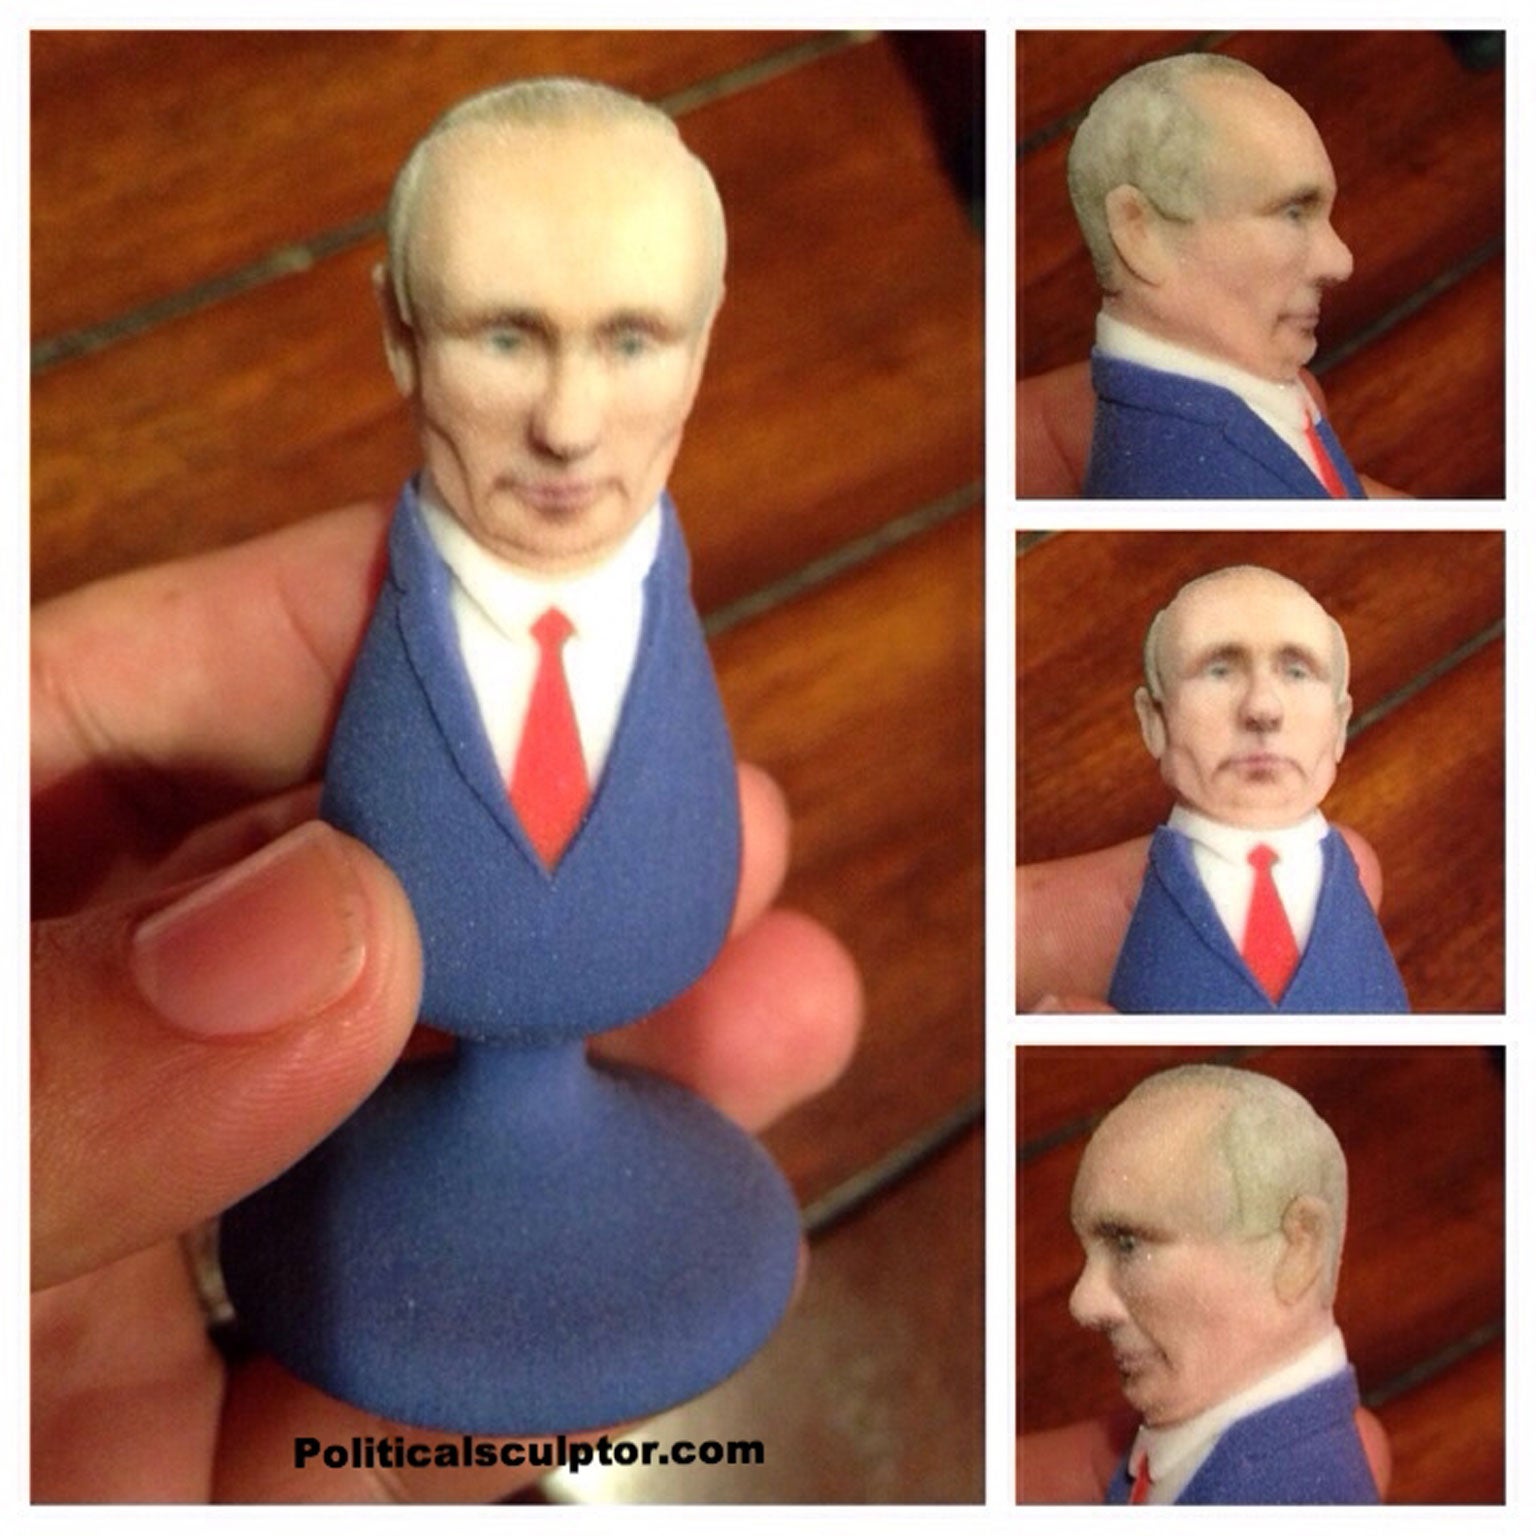 A case par excellence is graphic designer and self-described political sculptor, Fernando Sosa, who has his come up with his own unique way of (ahem) sticking it to Russia's favourite alpha male.